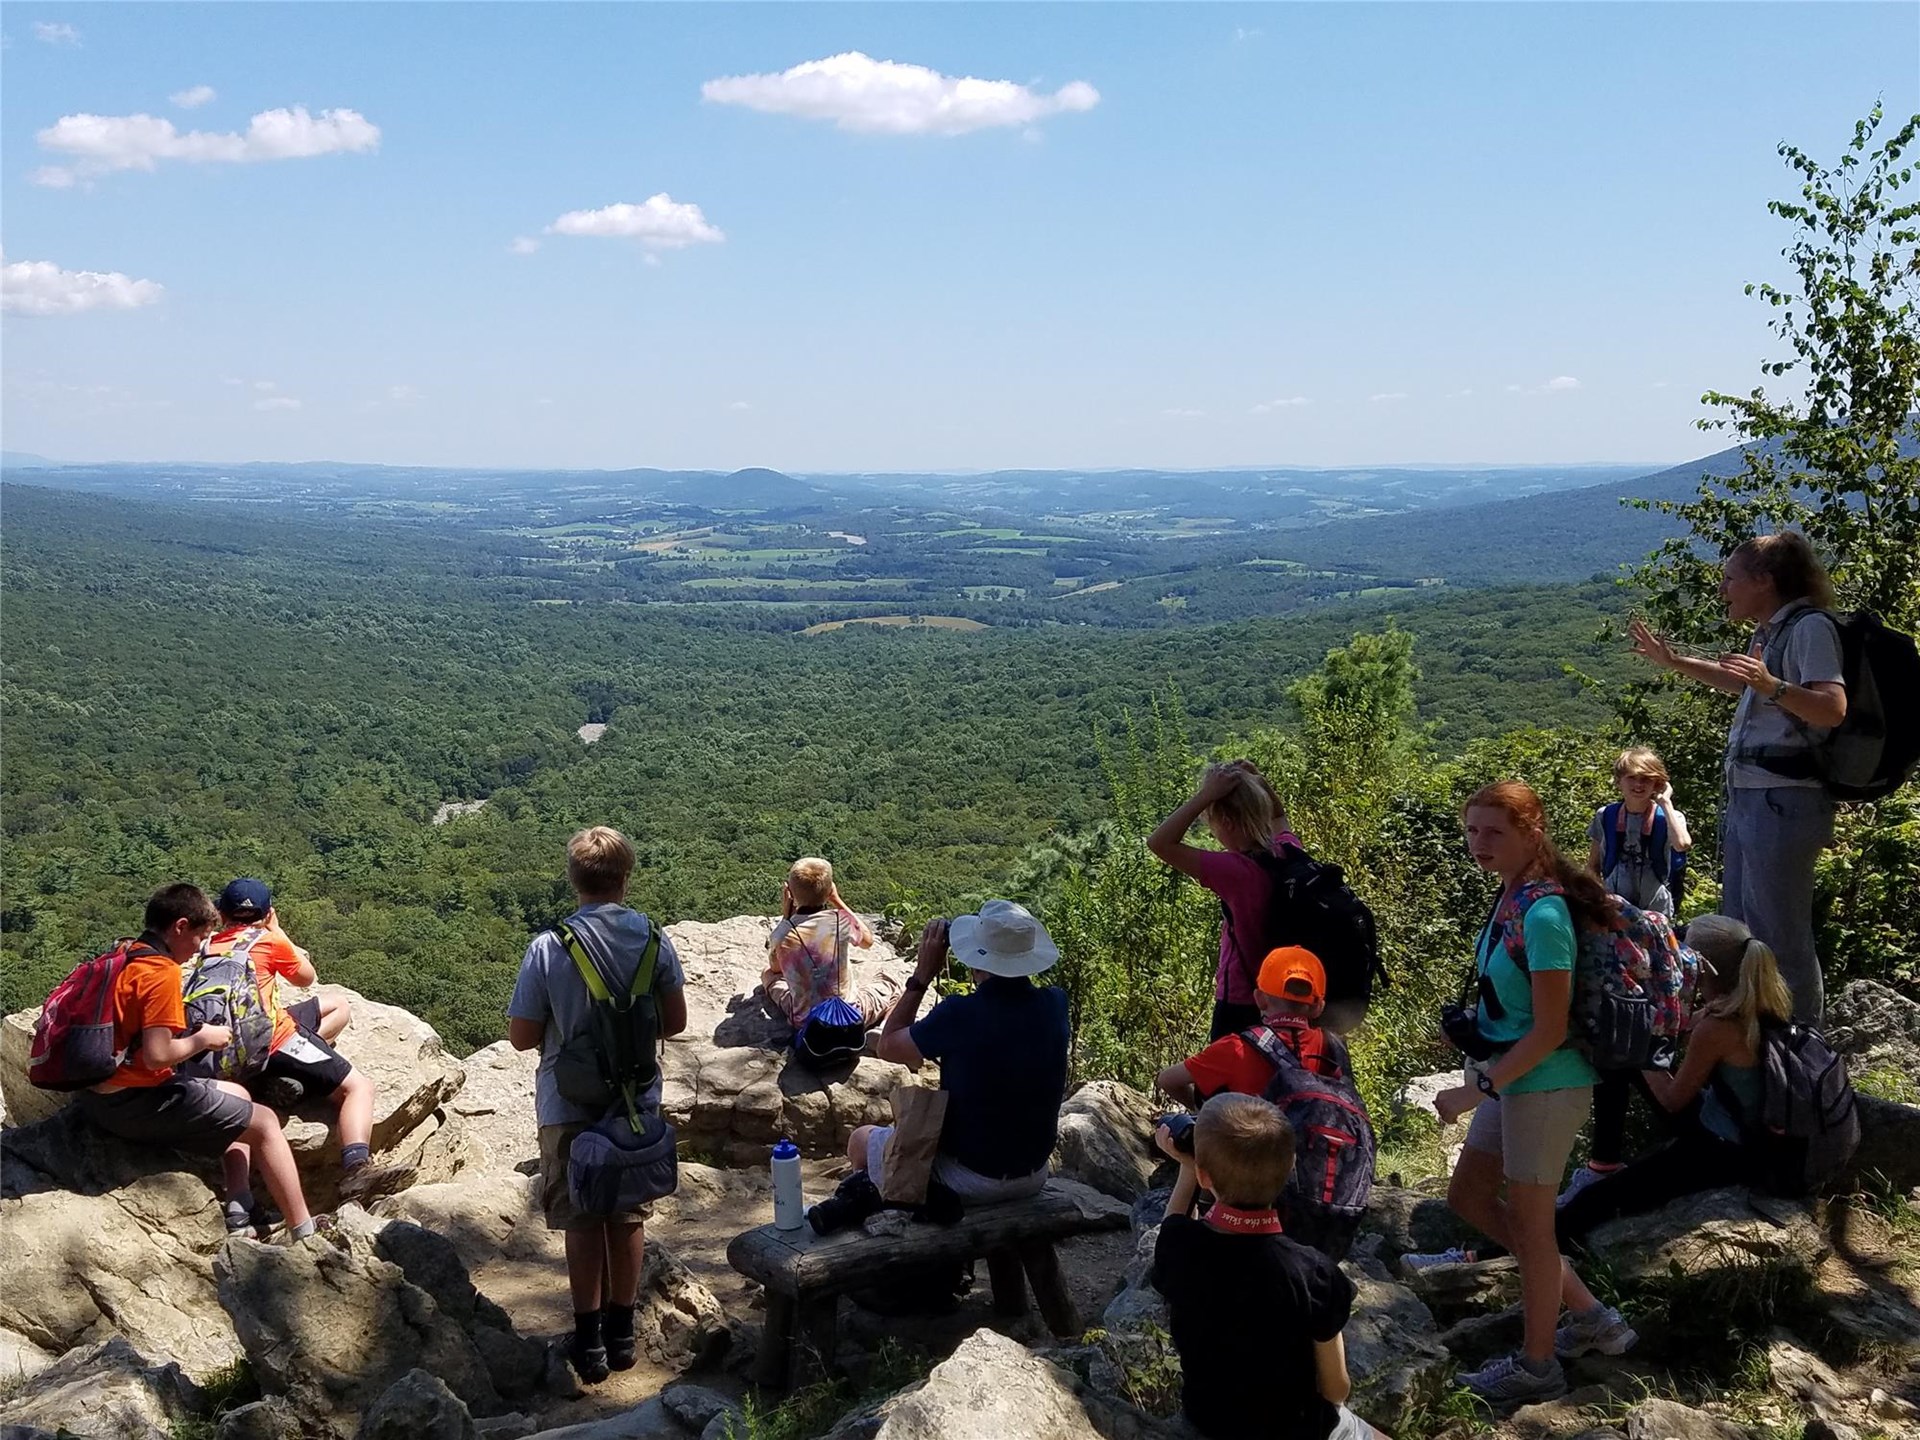 Go on an Appalachian Adventure with Hawk Mountain’s Summer Nature Camps